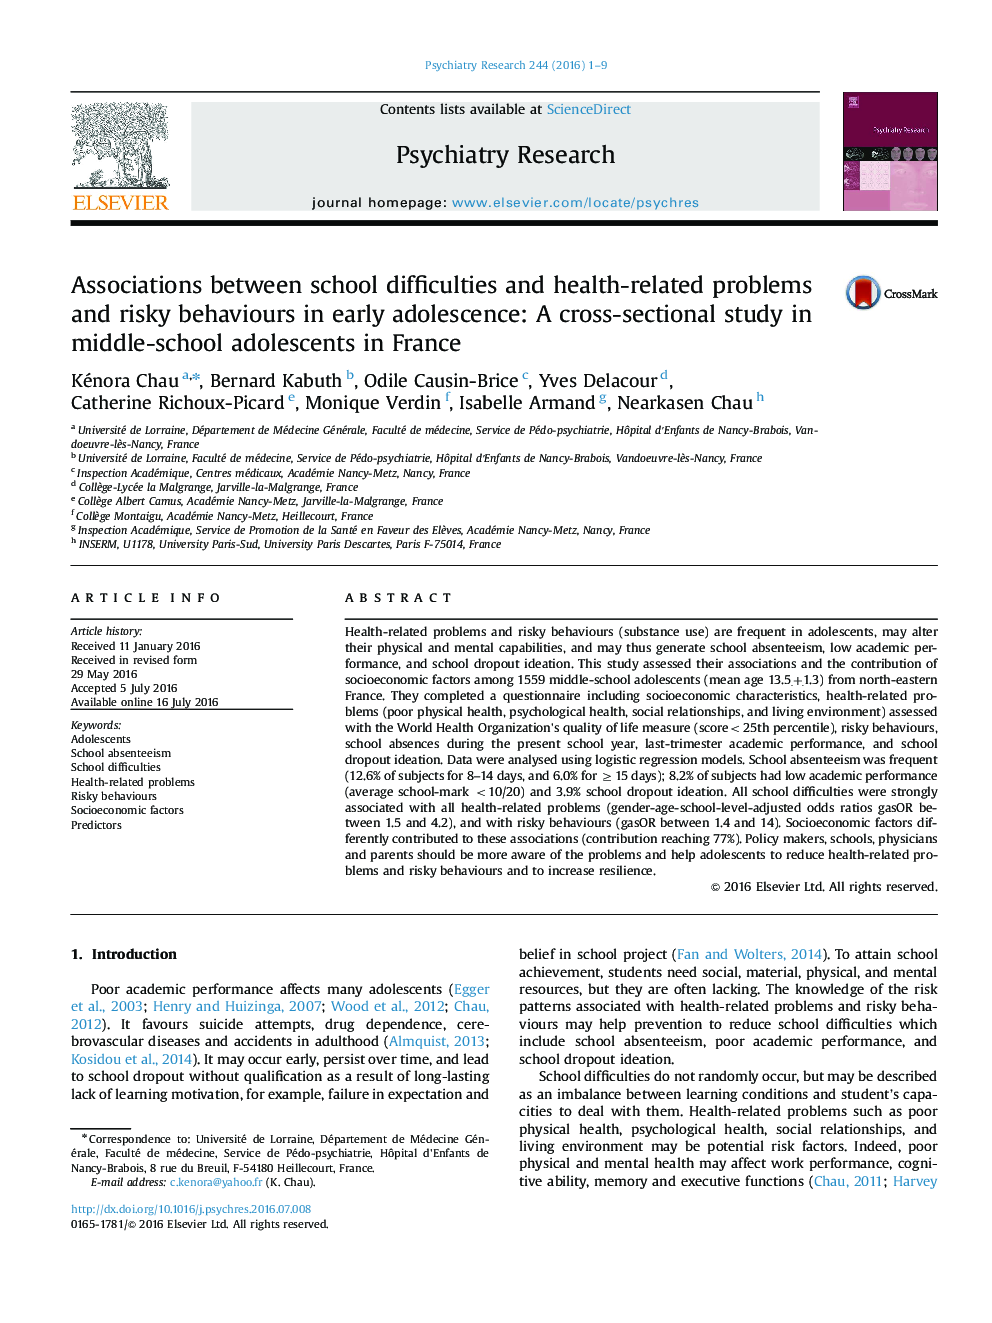 Associations between school difficulties and health-related problems and risky behaviours in early adolescence: A cross-sectional study in middle-school adolescents in France